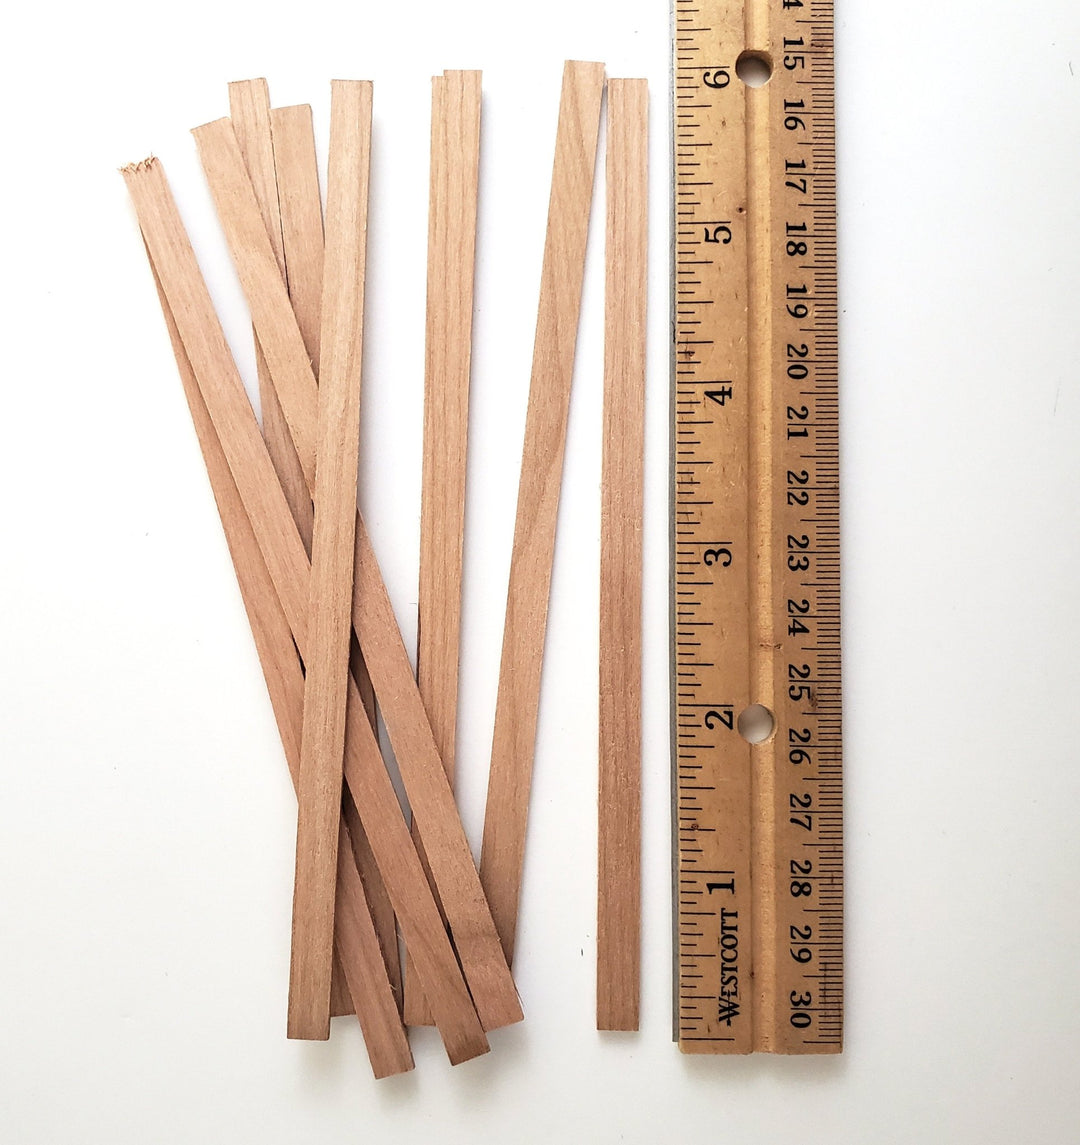 Cherry Wood Strips 10 Pieces 1/16 X 1/4 X 6 Long Crafts Models Miniatures 